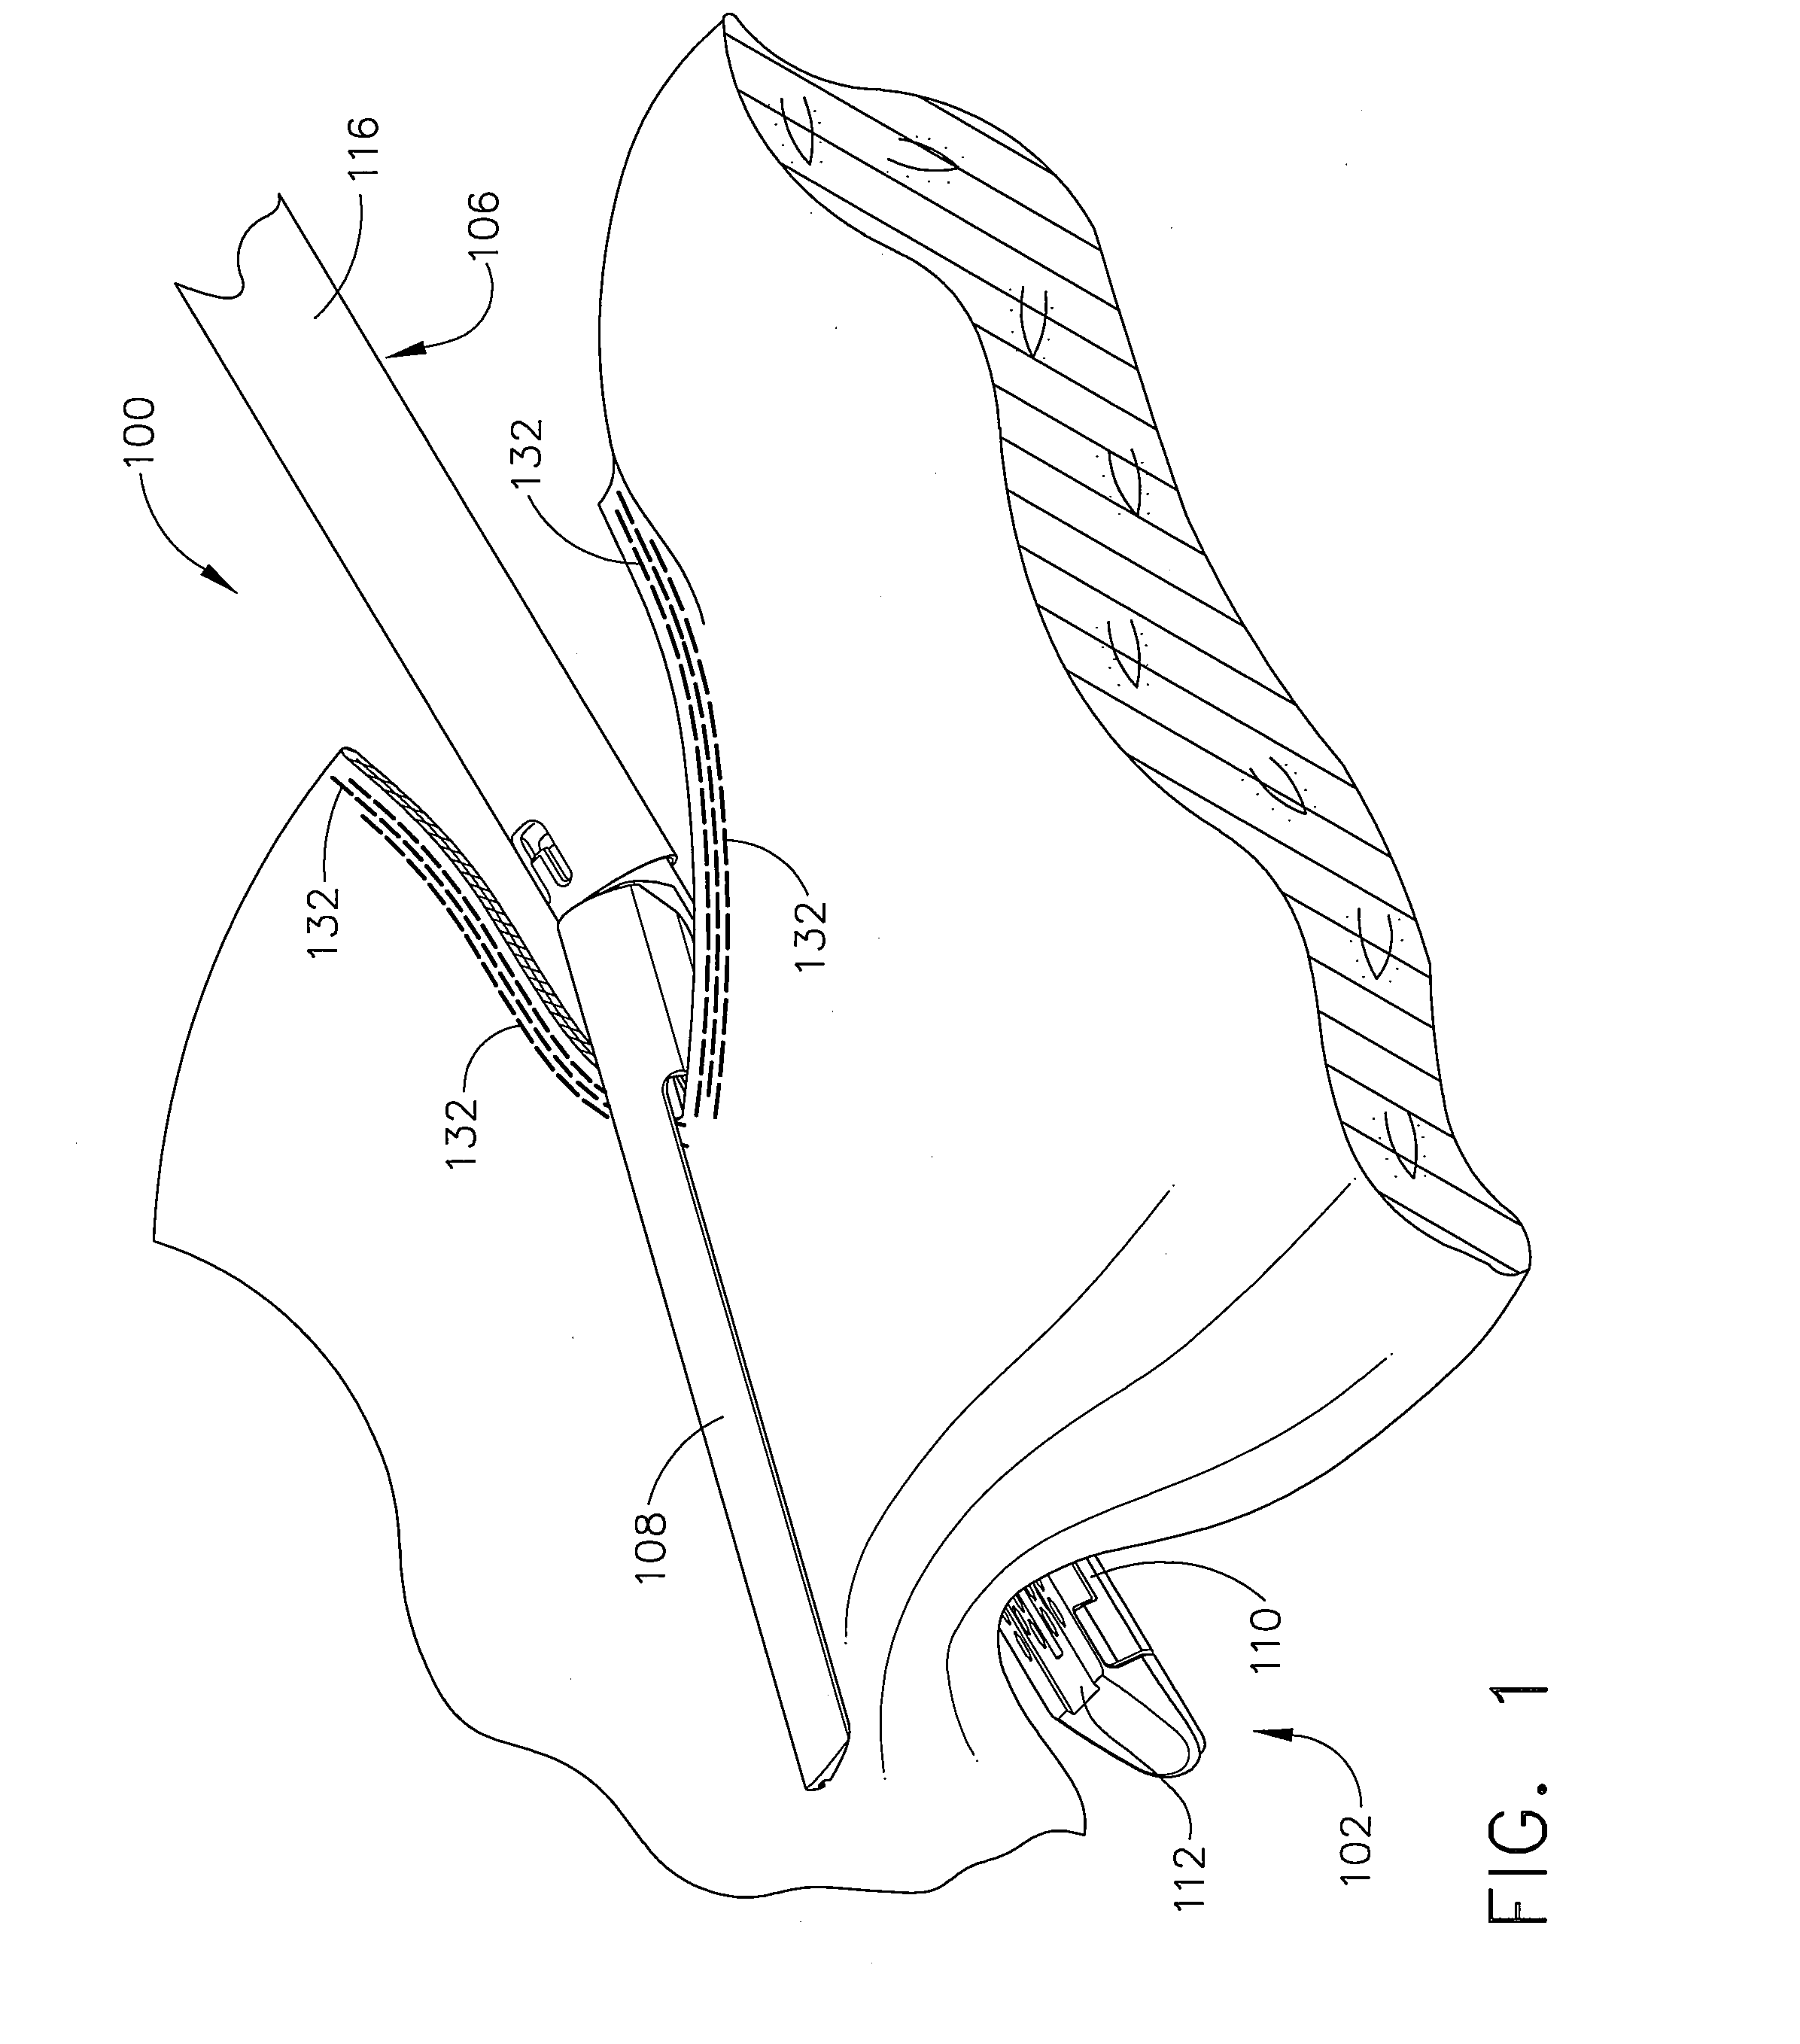 Curved end effector for a surgical stapling device